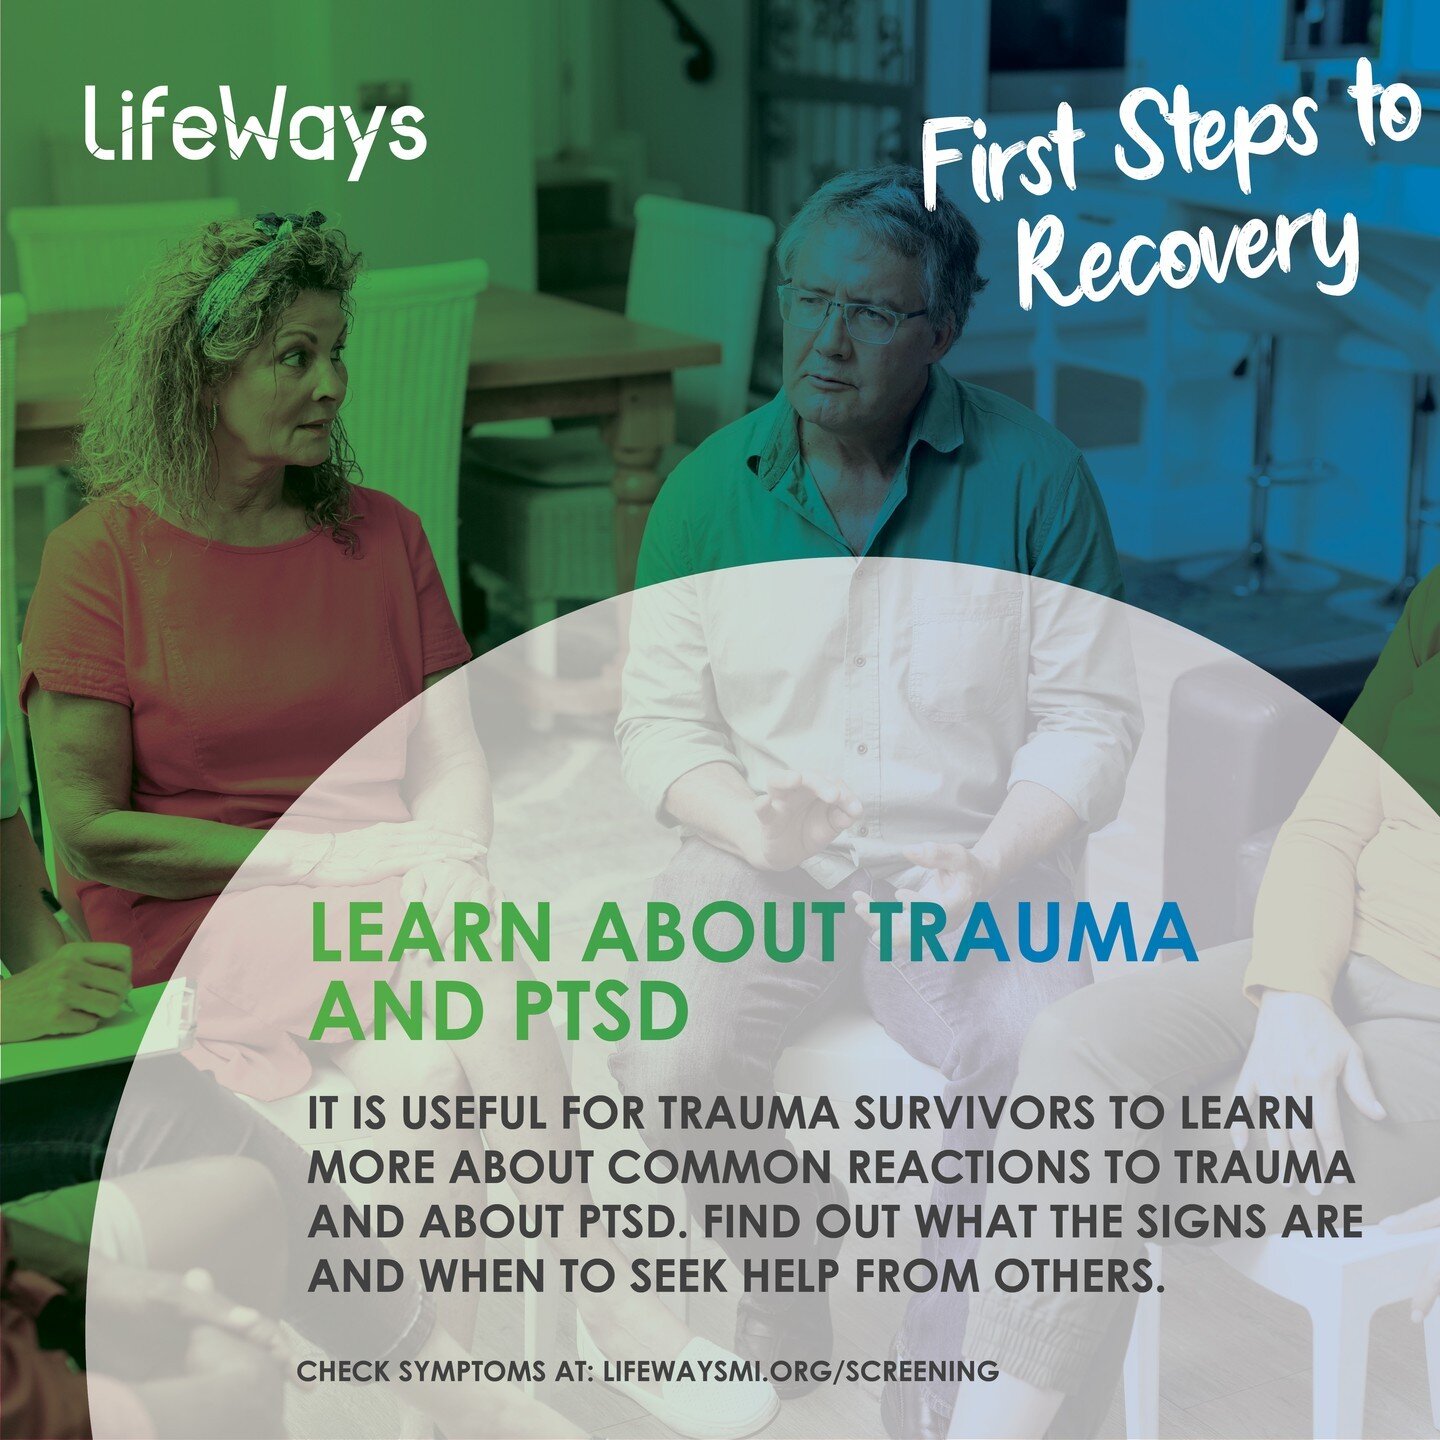 June 27 is Posttraumatic Stress Disorder (PTSD) Screening Day.

If you&rsquo;ve been through trauma and you think it&rsquo;s affecting your daily life, you can take our brief PTSD screening to see if you may have signs of PTSD. It is only 5 questions